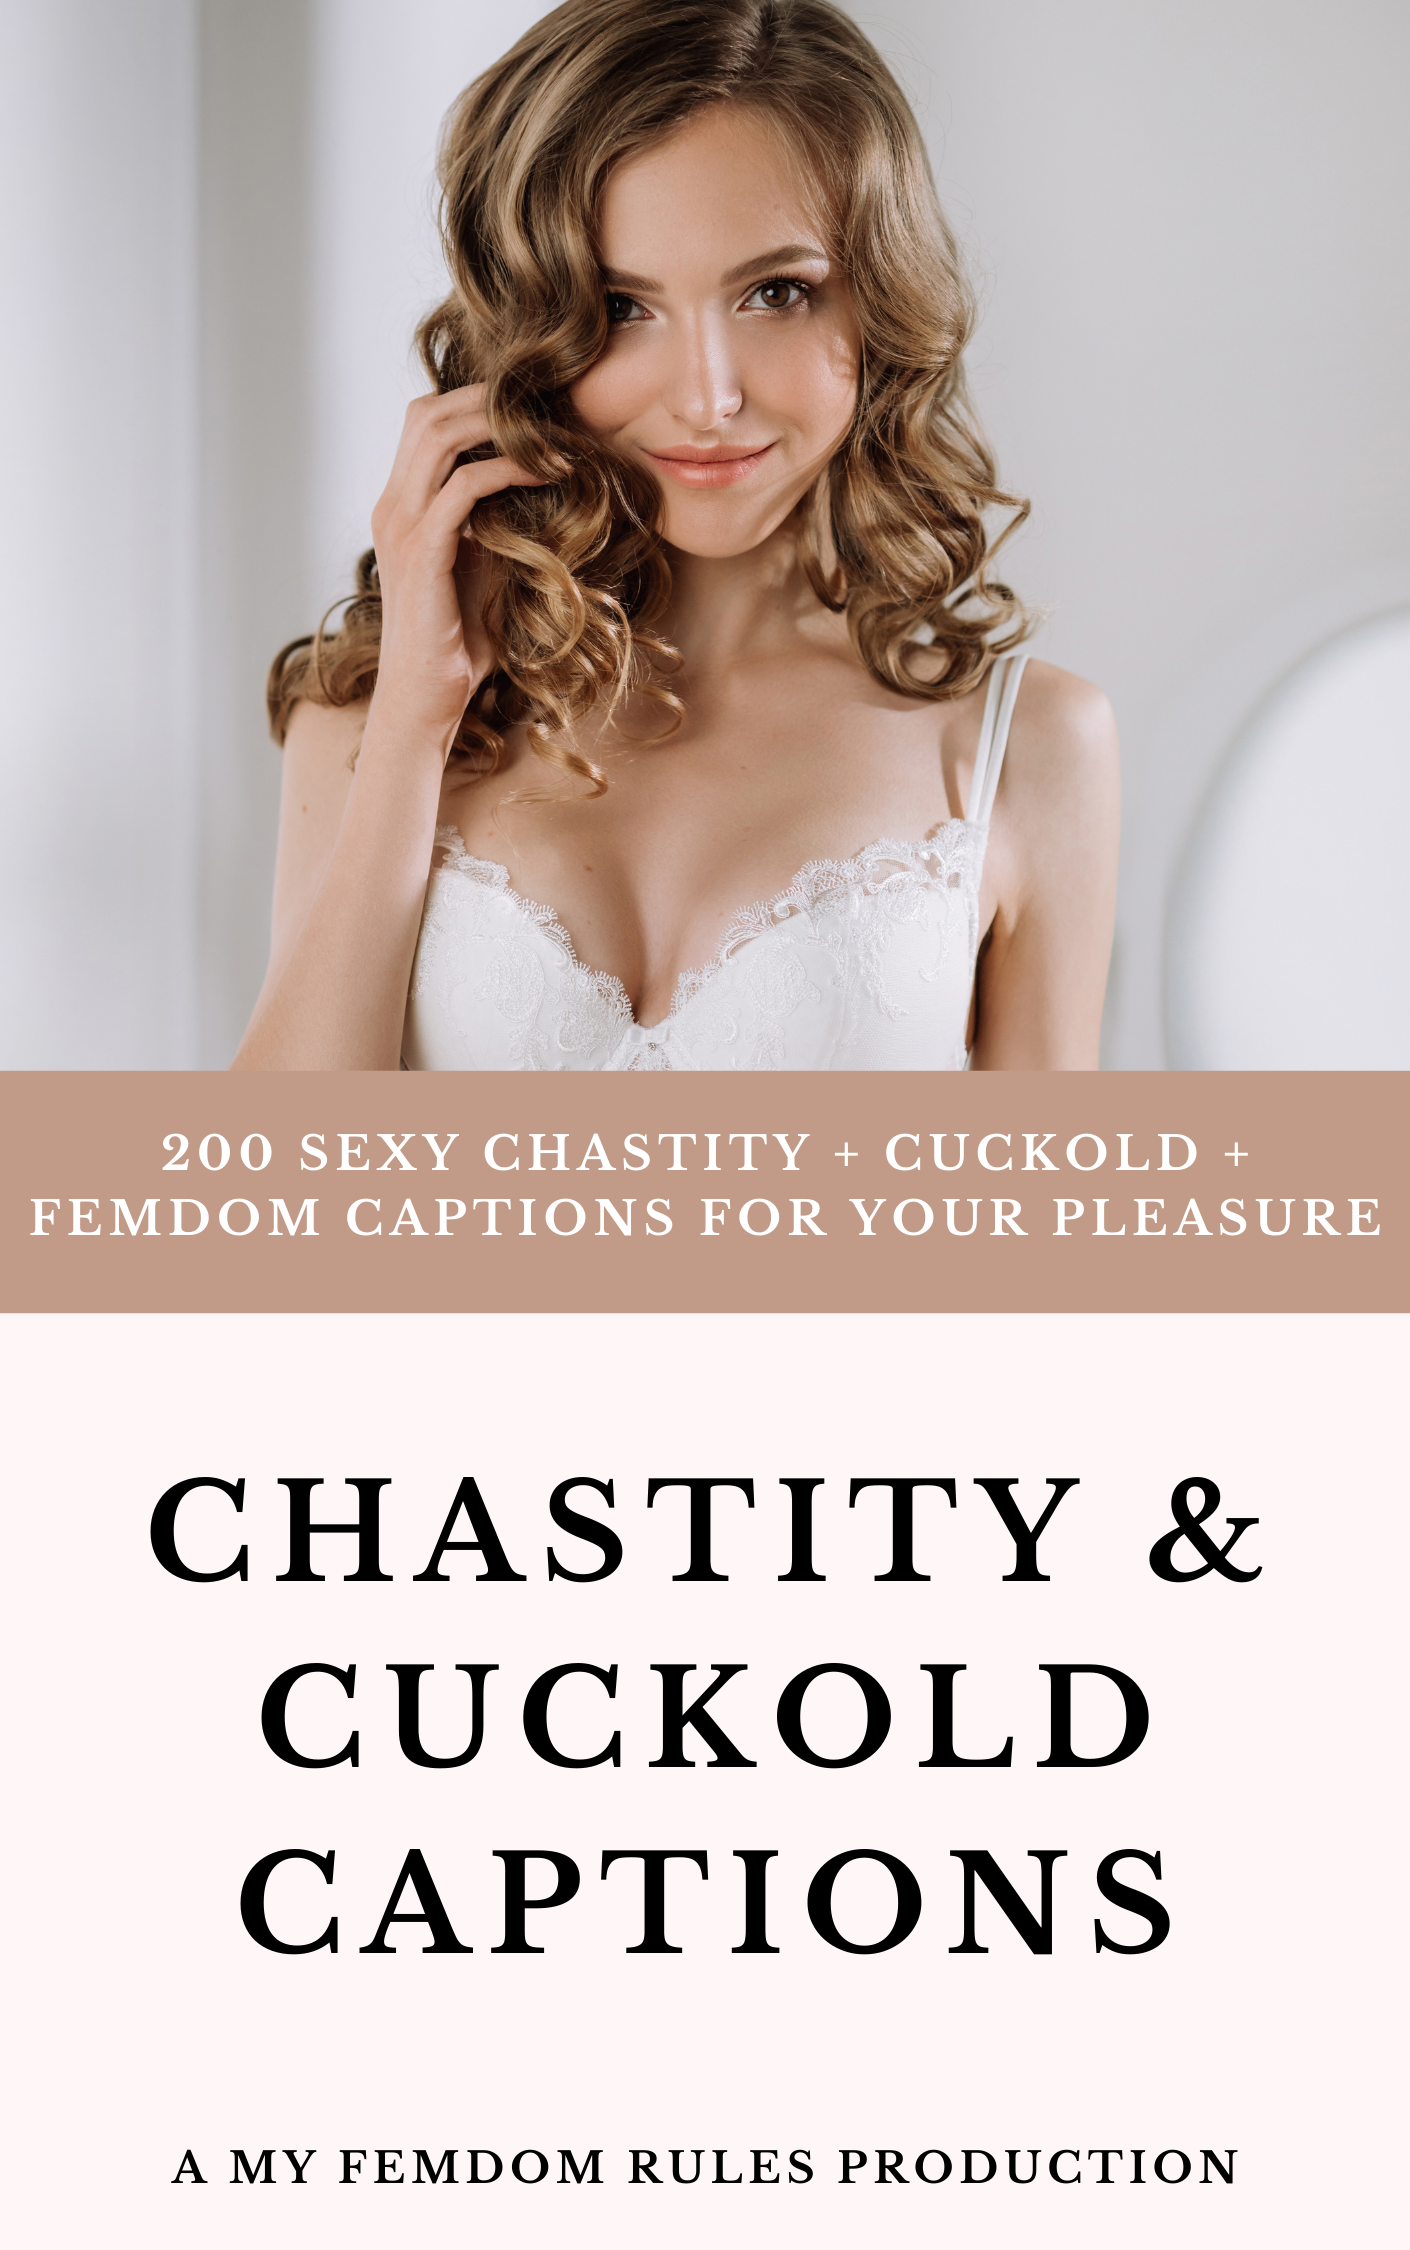 Chastity and Cuckold Captions Book (PDF) pic pic